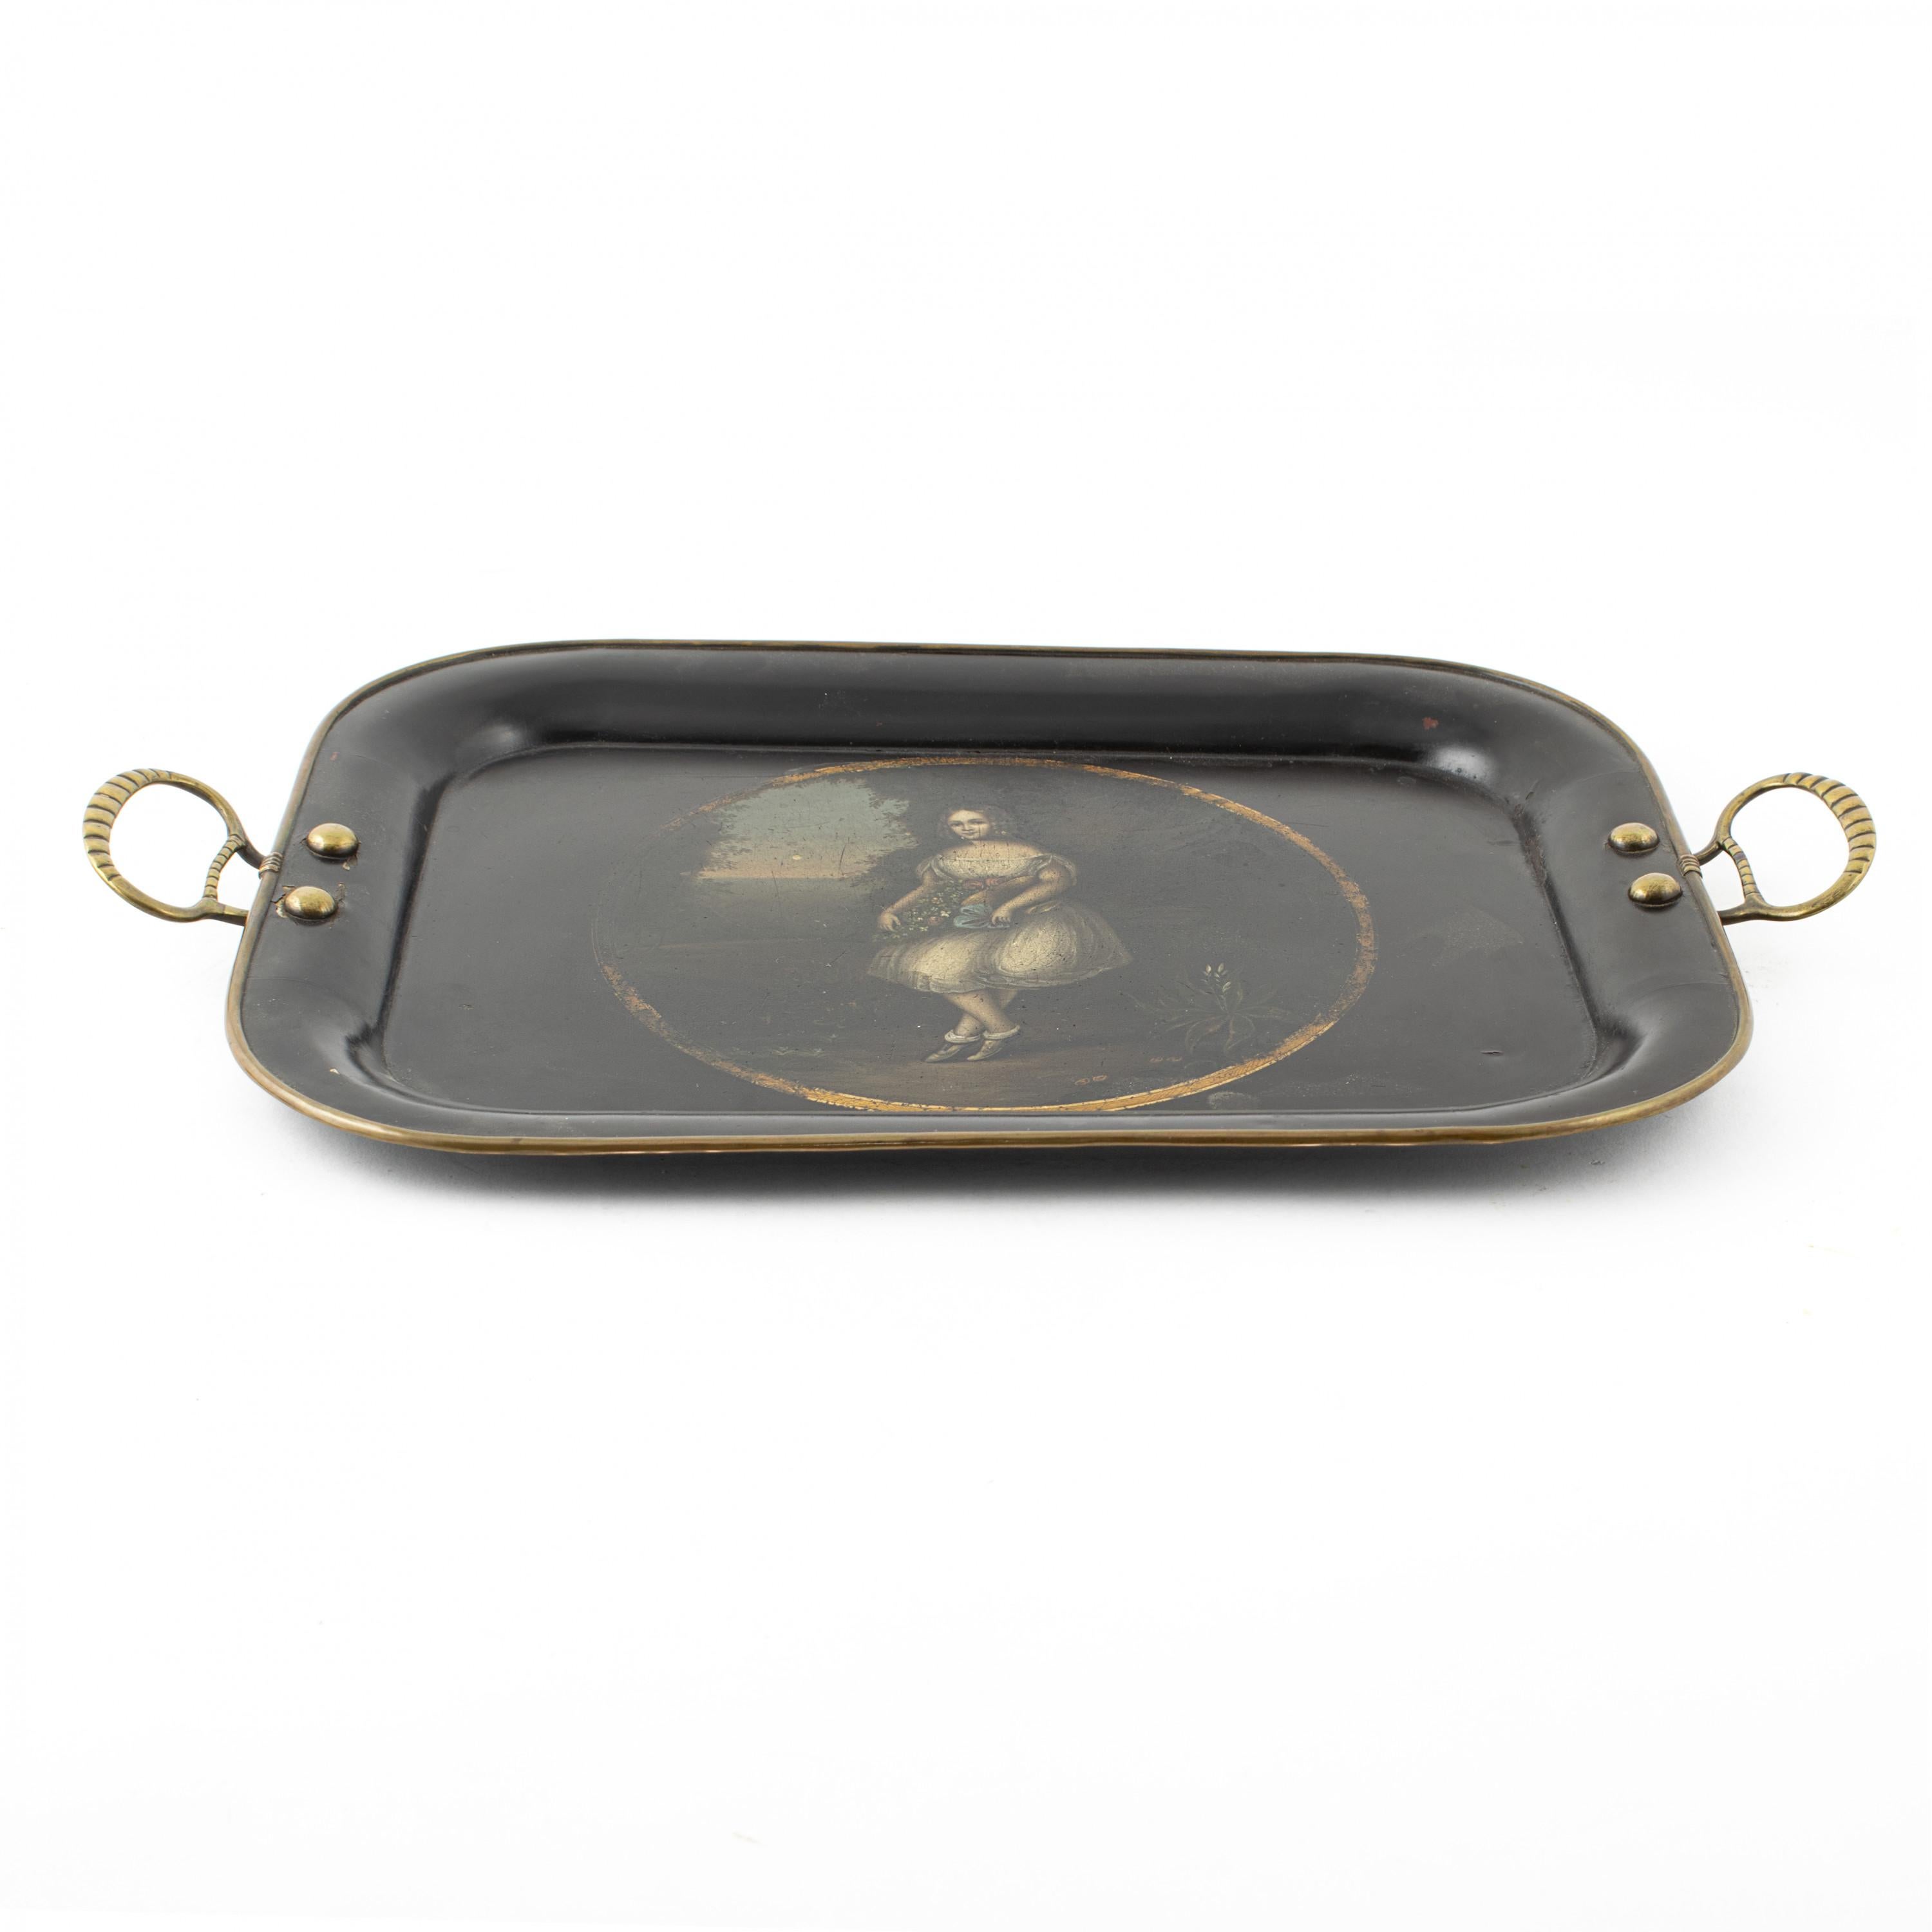 A small rectangular Regency toleware tray, with brass loop handles on the side.
The center of the tray is decorated with a hand painted portrait of young woman, with a basket of flowers, standing in a landscape scene.
   